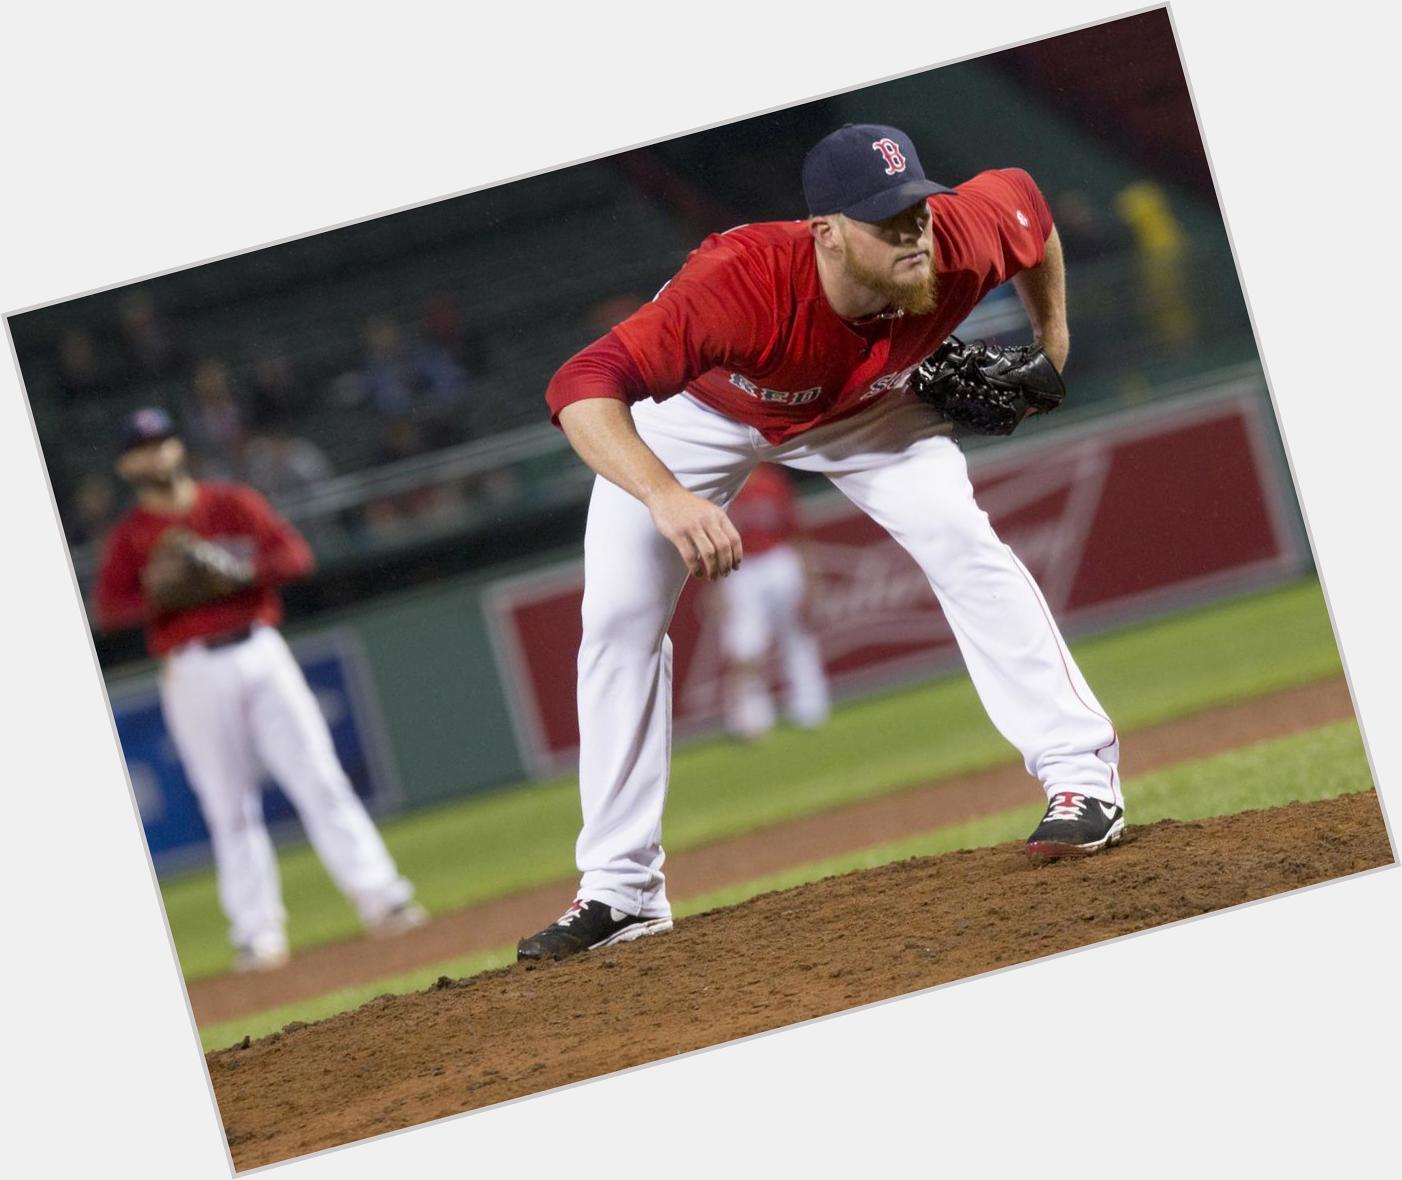 Happy birthday to one of the best closers in the game, Craig Kimbrel! 